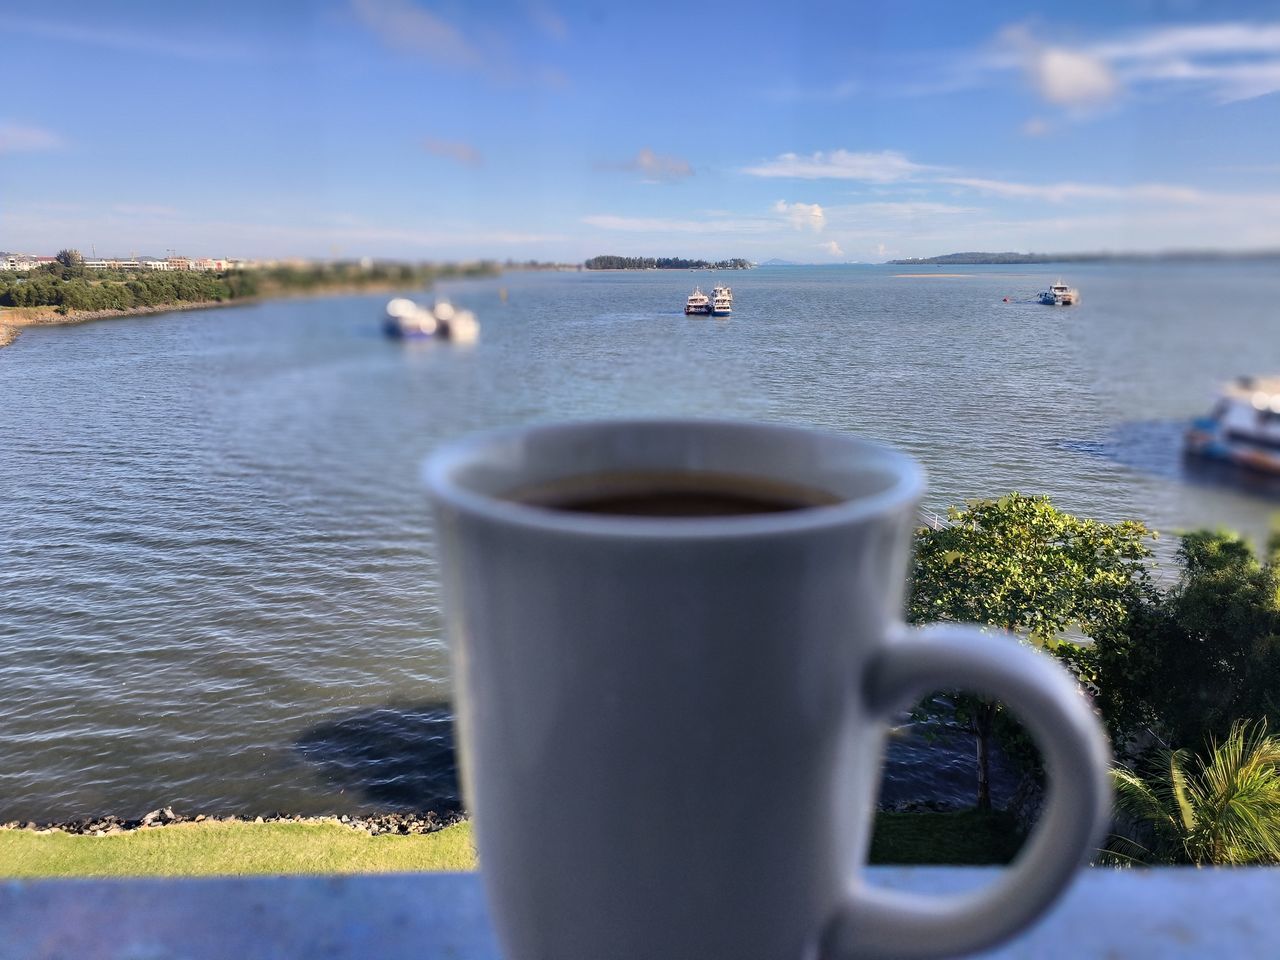 water, coffee cup, sky, drink, coffee, mug, cup, sea, nature, food and drink, beach, refreshment, morning, day, shore, cloud, blue, no people, transportation, outdoors, vacation, land, travel destinations, scenics - nature, coast, travel, nautical vessel, plant, beauty in nature, tranquility, ocean, hot drink